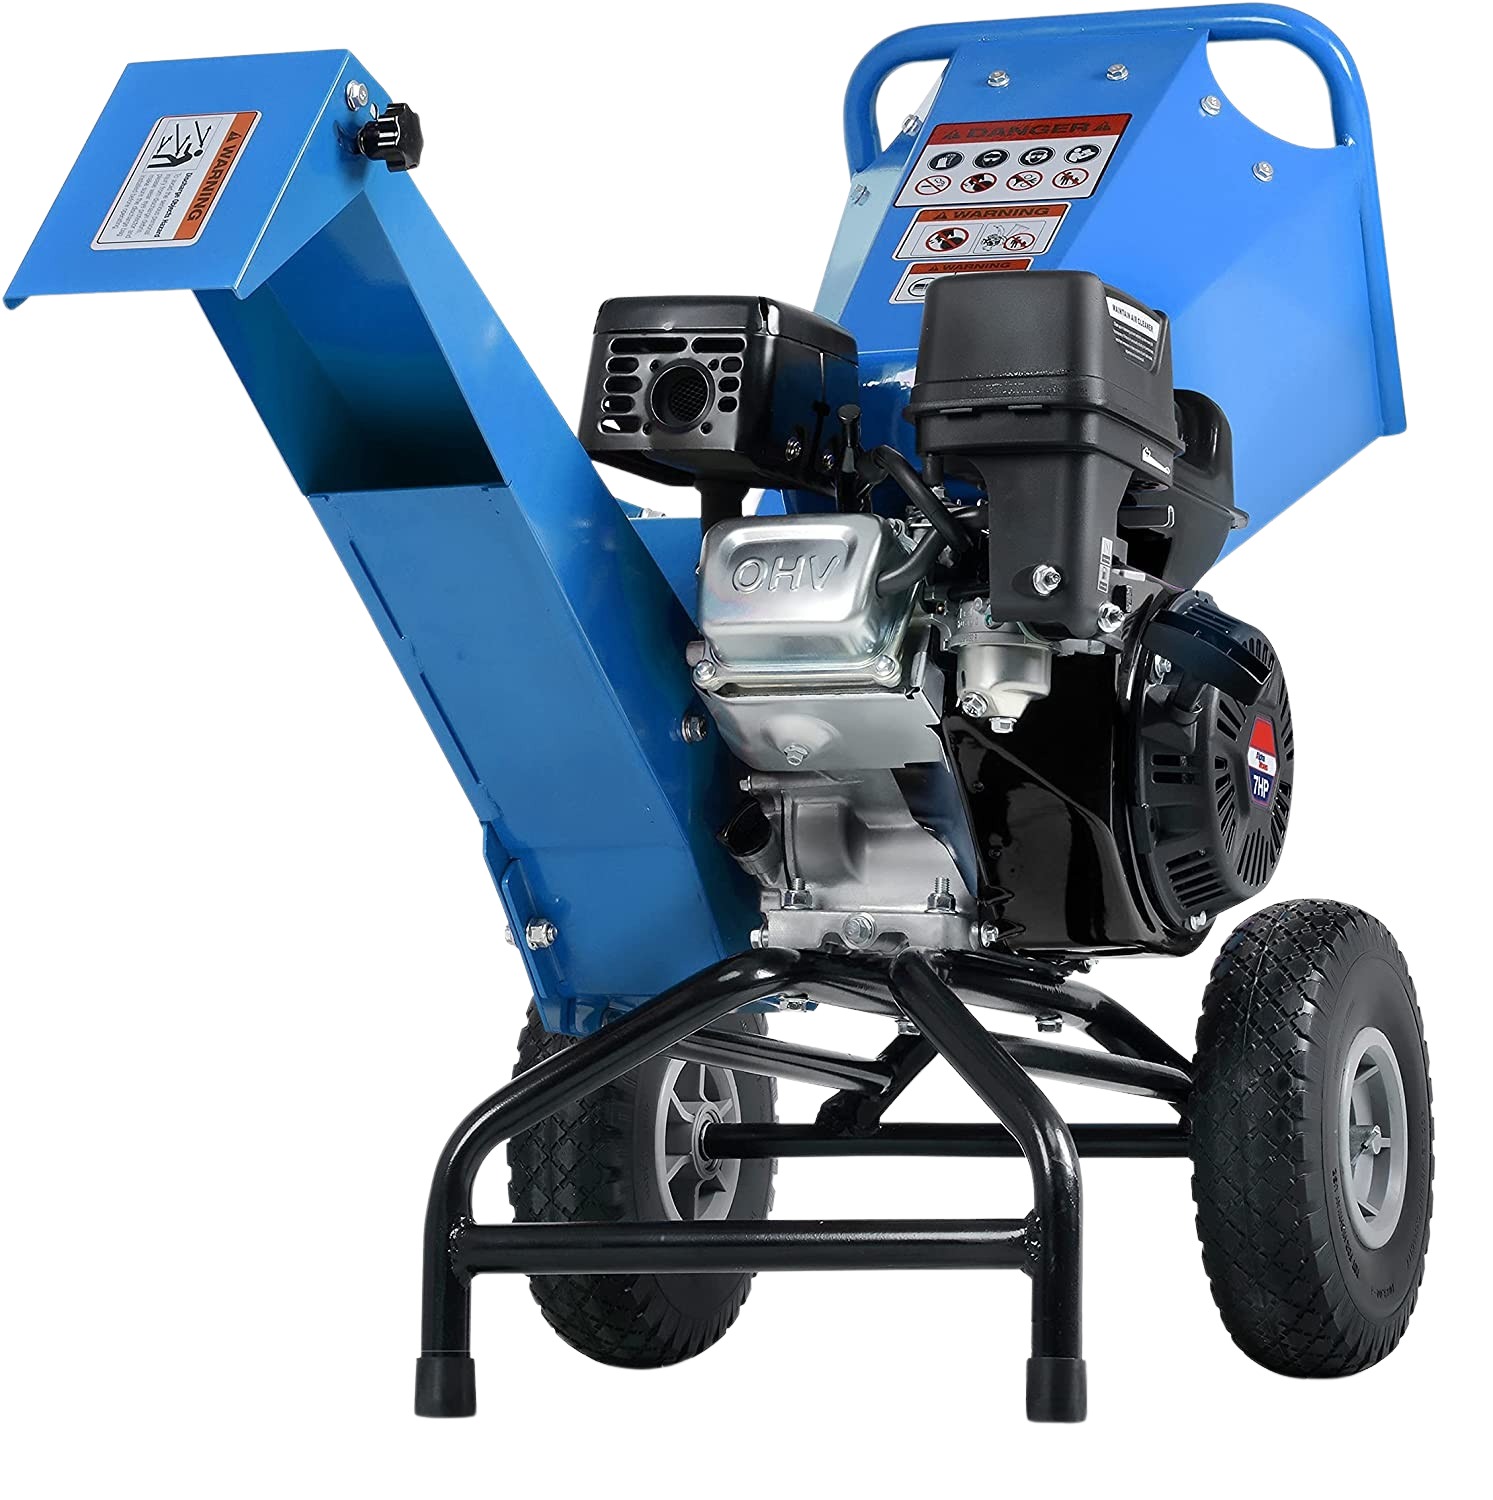 Landworks GUO067 7HP 212CC Gas Engine 3" Max Branch Diameter Wood Chipper and Shredder New